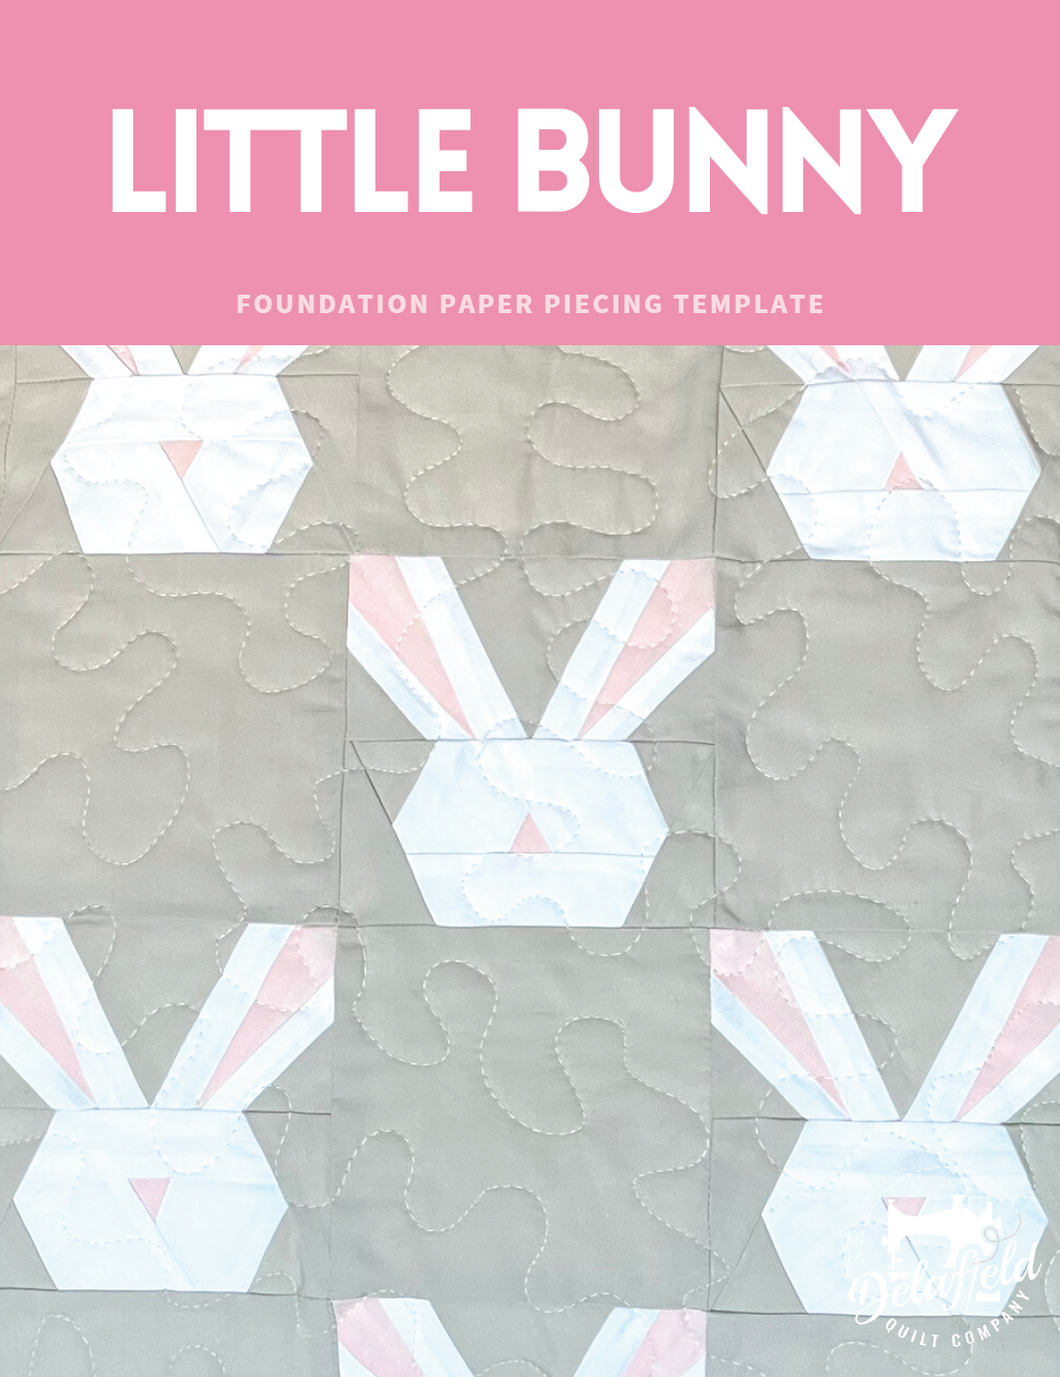 Little Bunny - FREE - Digital Download Foundation Paper Piecing Template